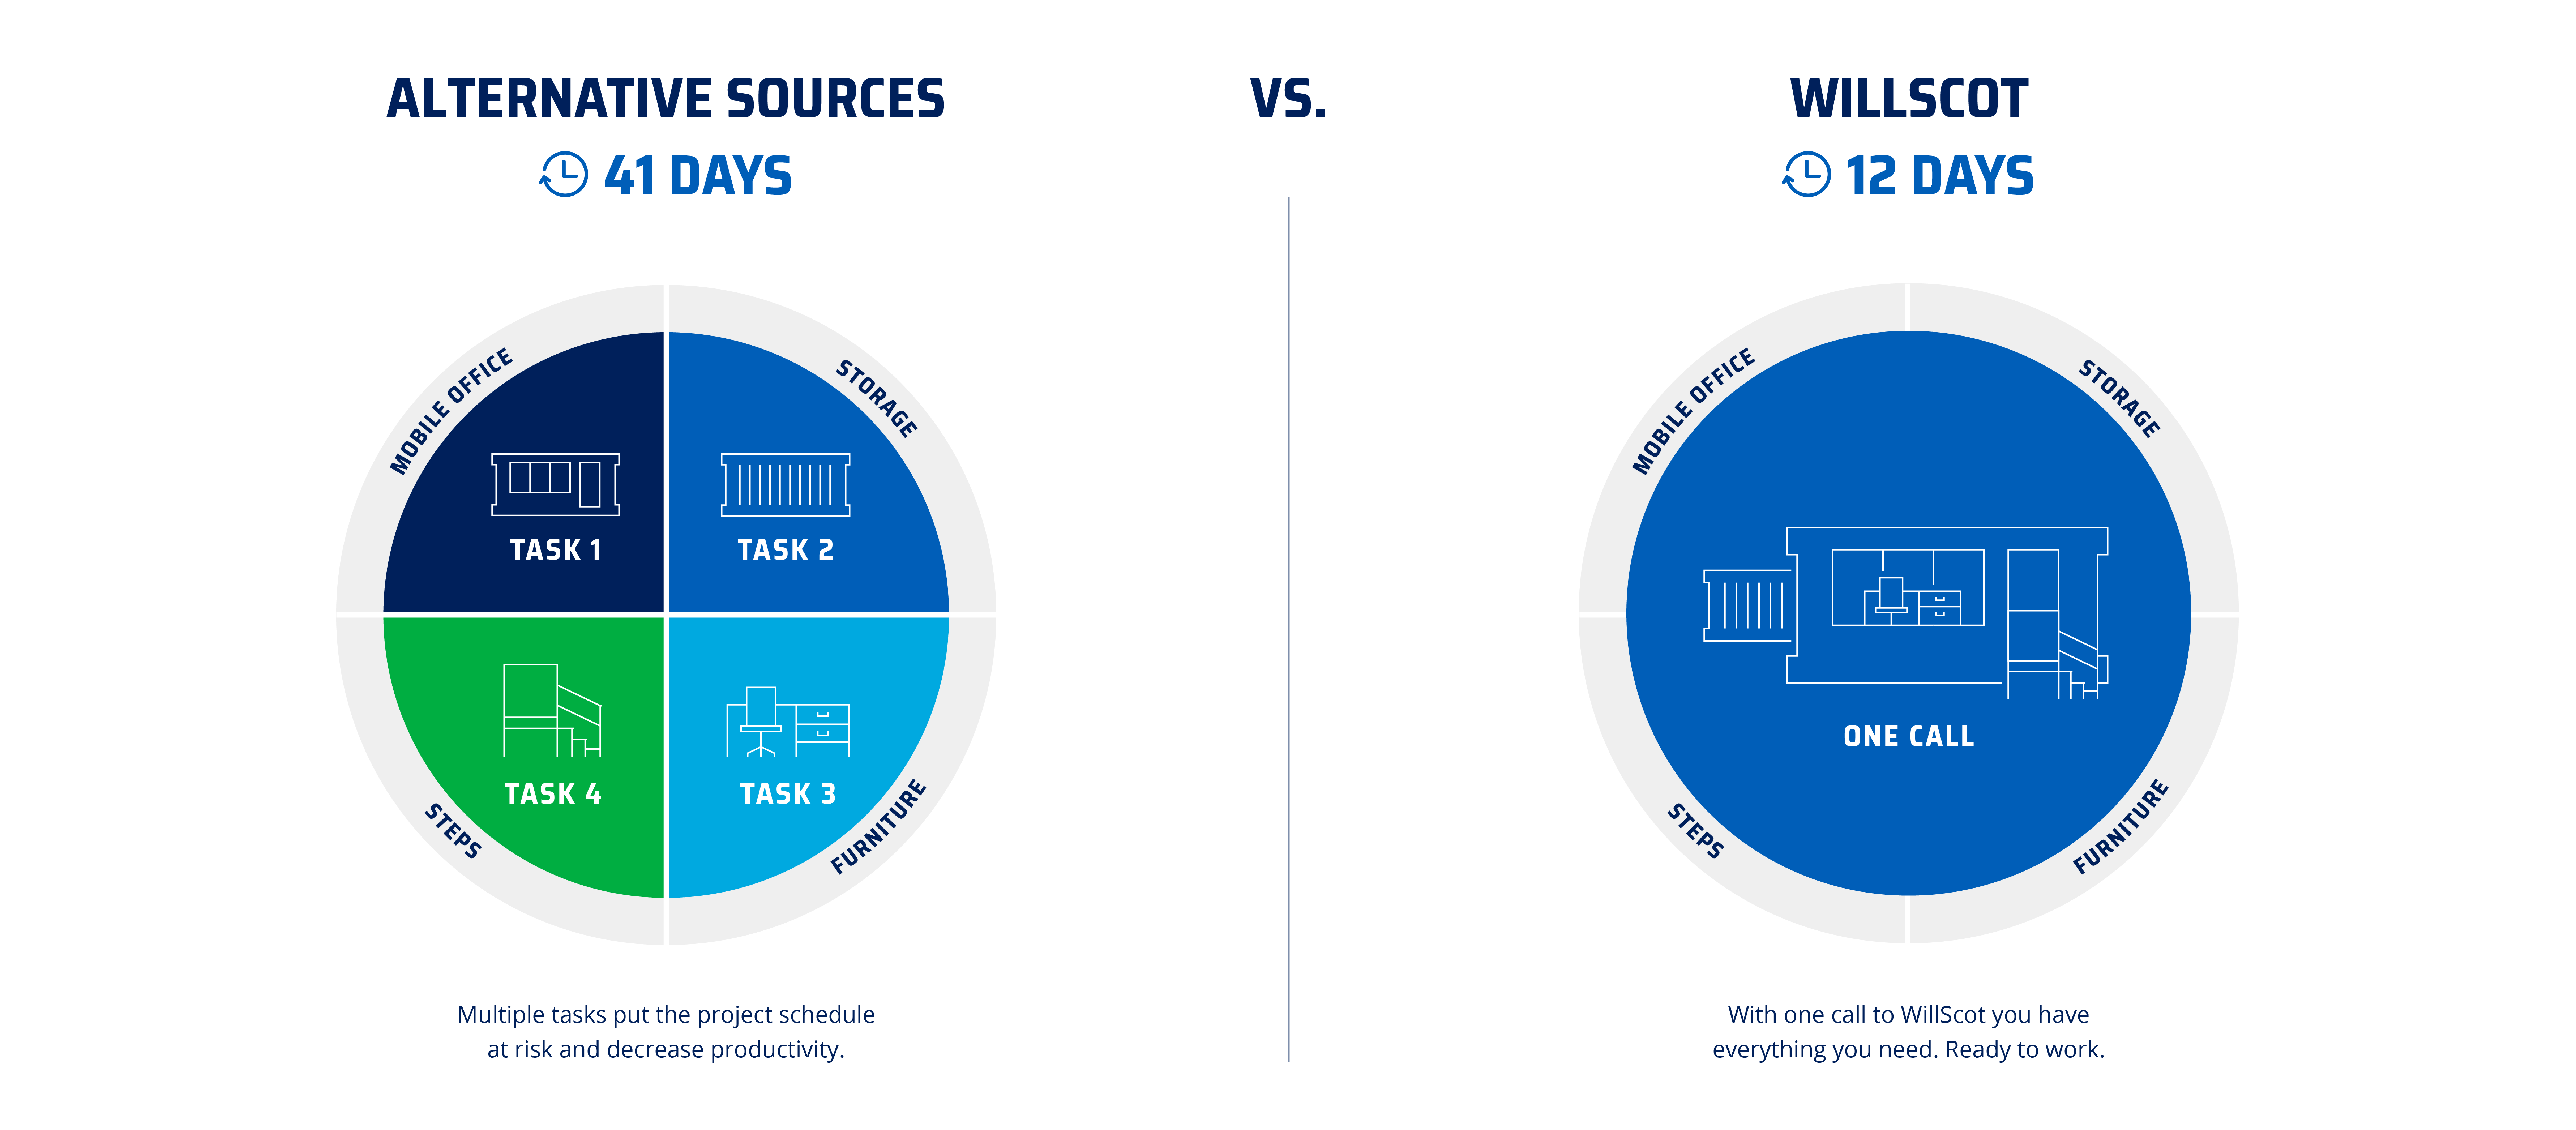 Graphical representation of the time saved when you choose WillScot versus alternative sources. 